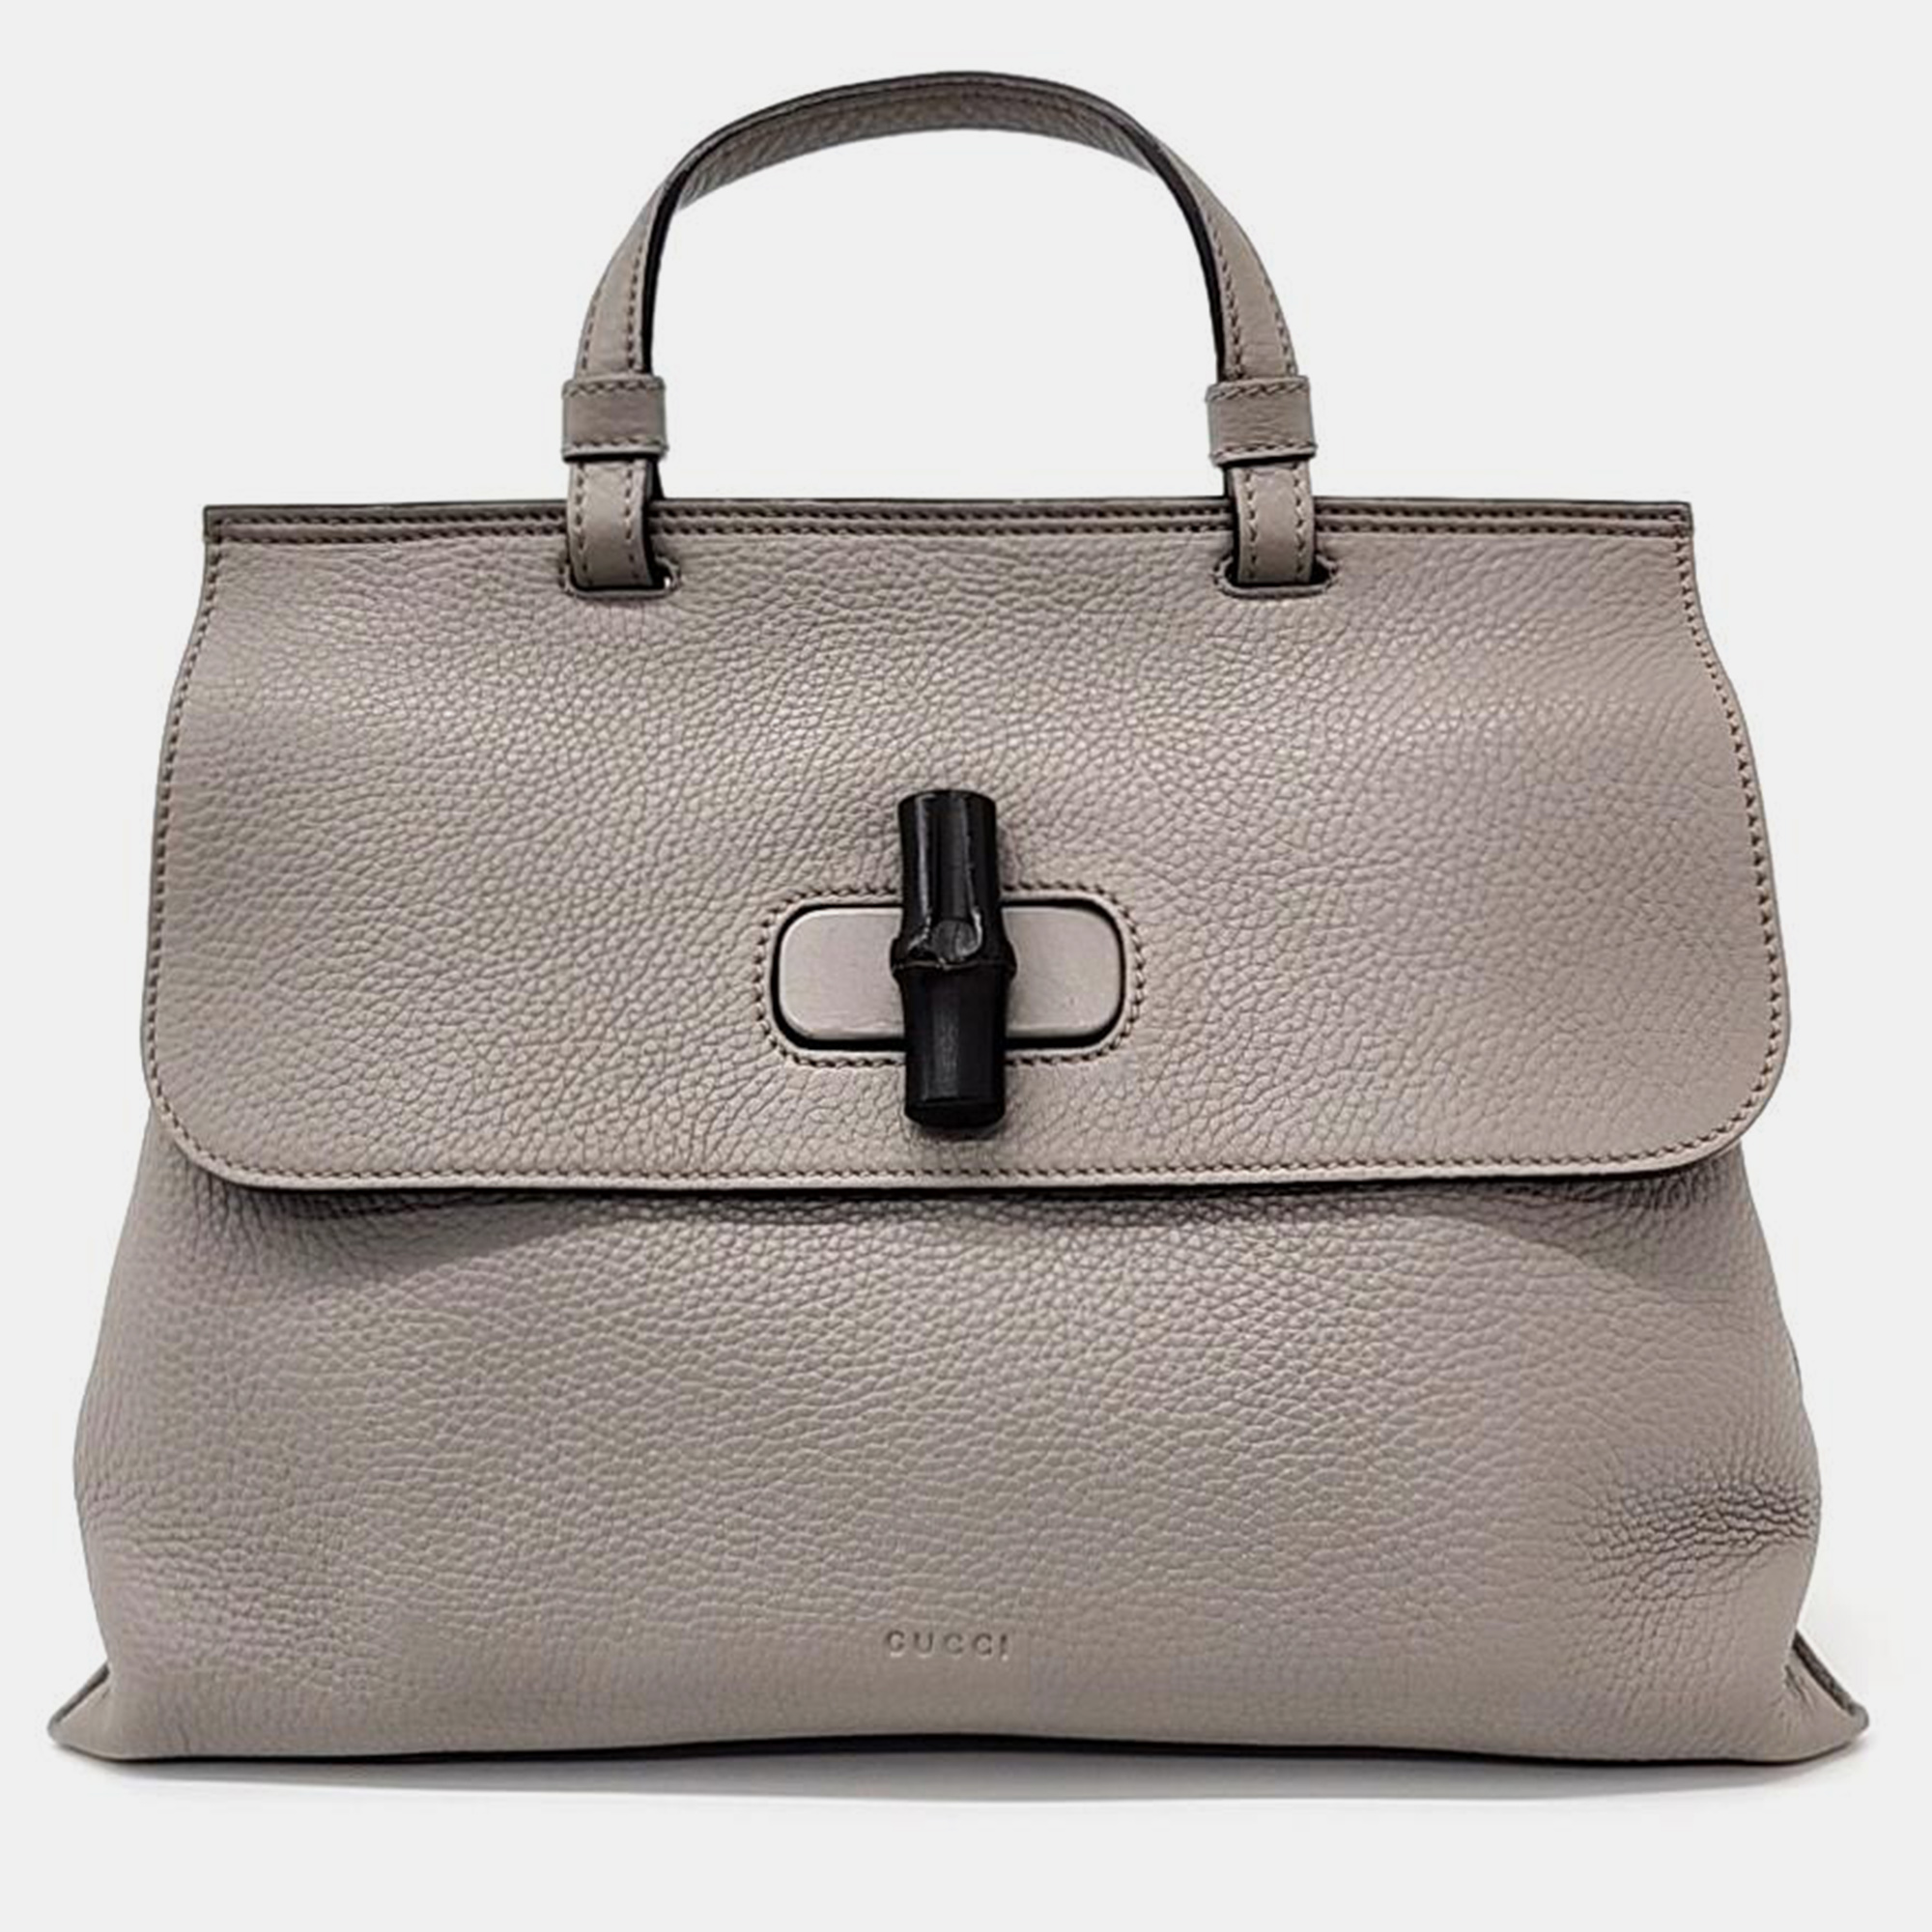 Gucci mocha grey leather daily tote bag